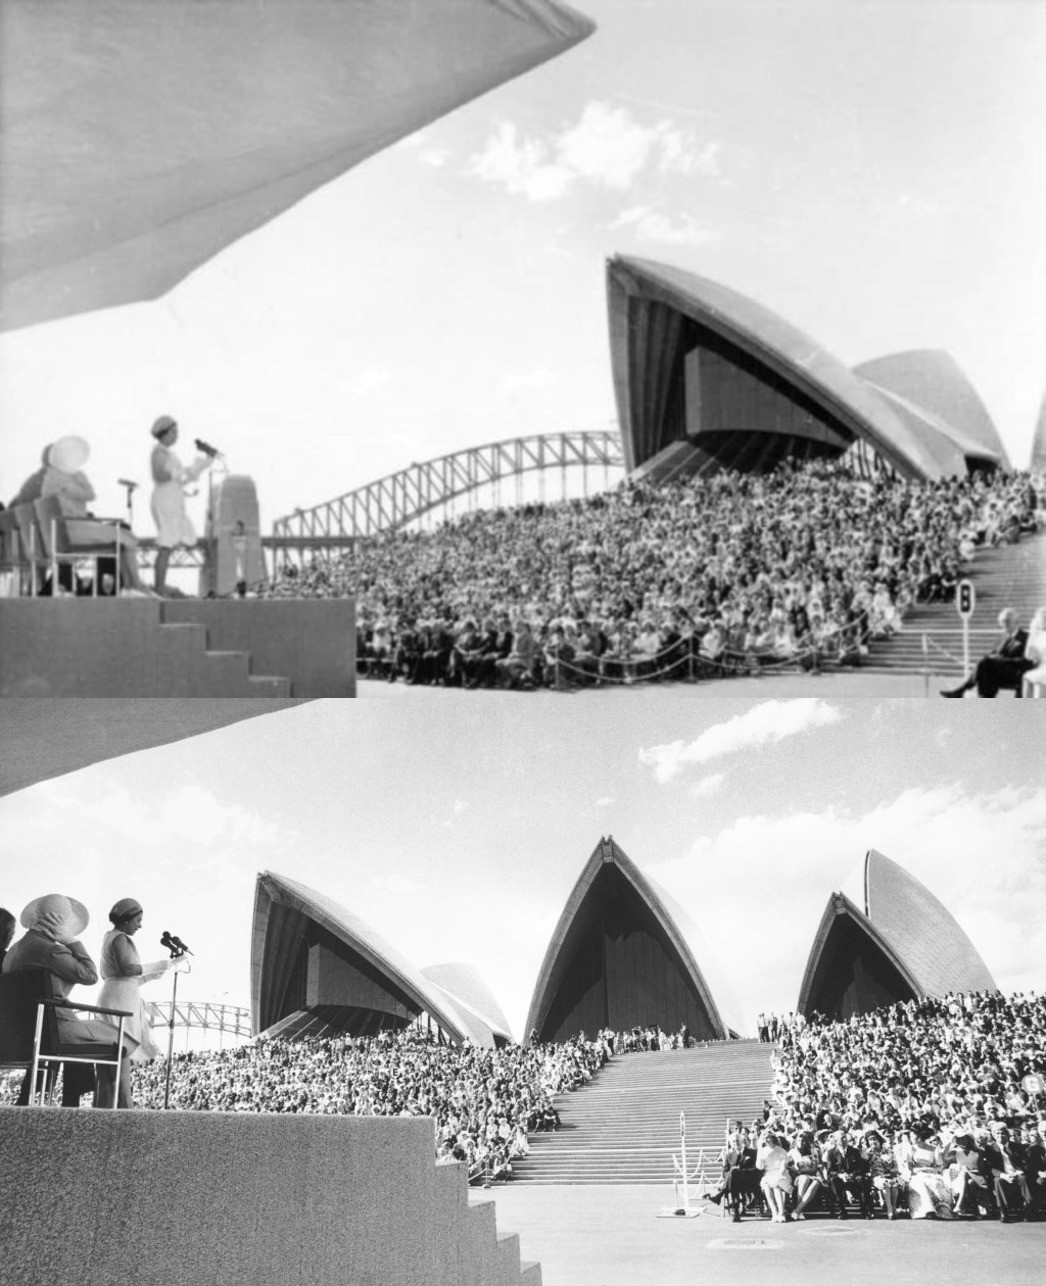 The opening of the Sydney Opera House by Queen Elizabeth 11 on 20 October was telecast to overseas viewers by OTC satellite circuits 